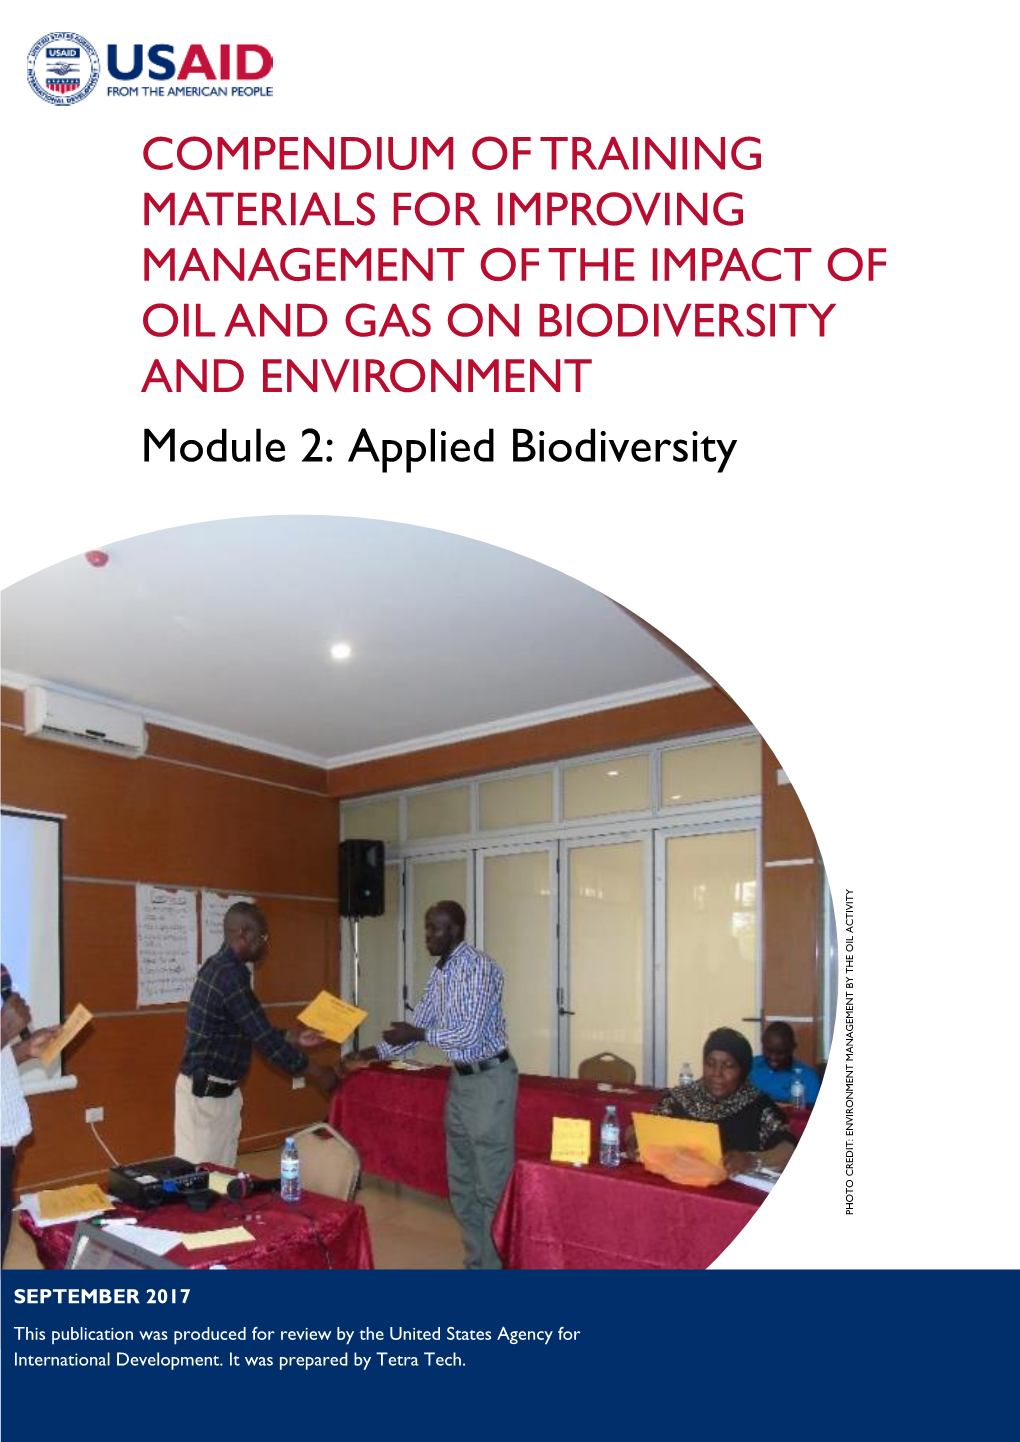 COMPENDIUM of TRAINING MATERIALS for IMPROVING MANAGEMENT of the IMPACT of OIL and GAS on BIODIVERSITY and ENVIRONMENT Module 2: Applied Biodiversity